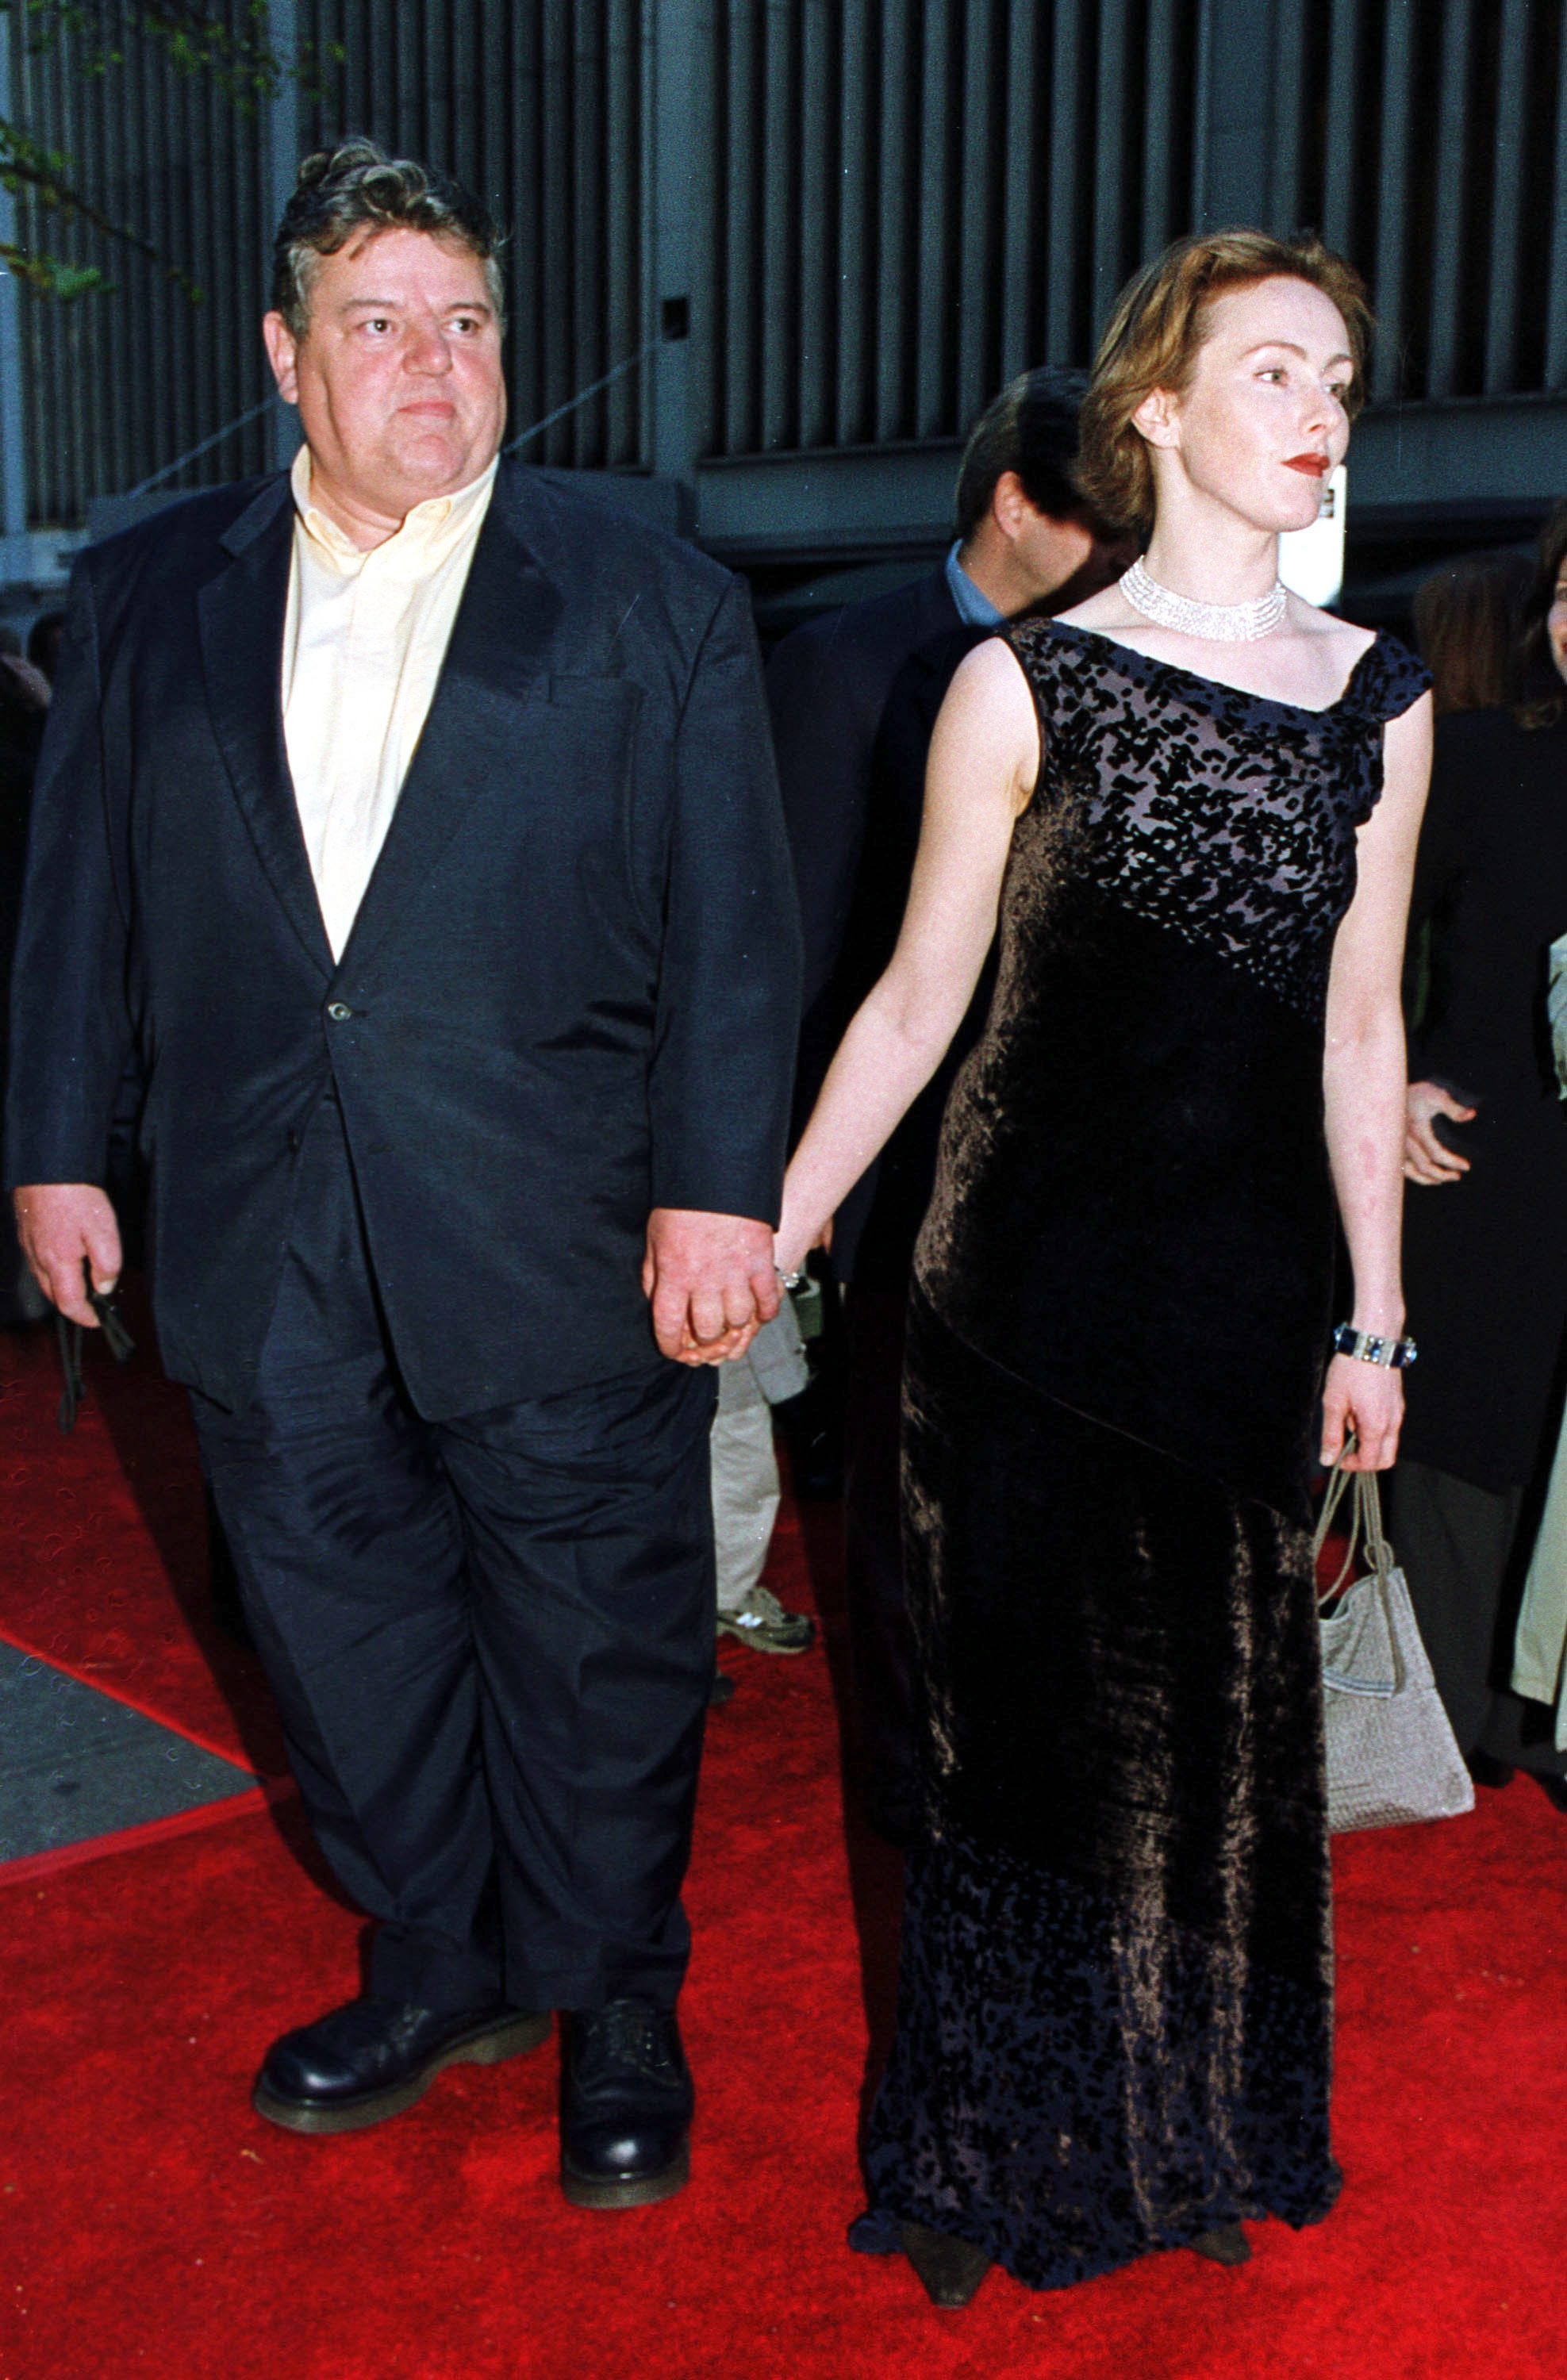 Robbie Coltrane and Rhona Gemmell are pictured as they arrive for the New York Premiere of the film 'Harry Potter and the Sorcerer's Stone' November 11, 2001, at Ziegfeld Theater in New York City | Source: Getty Images